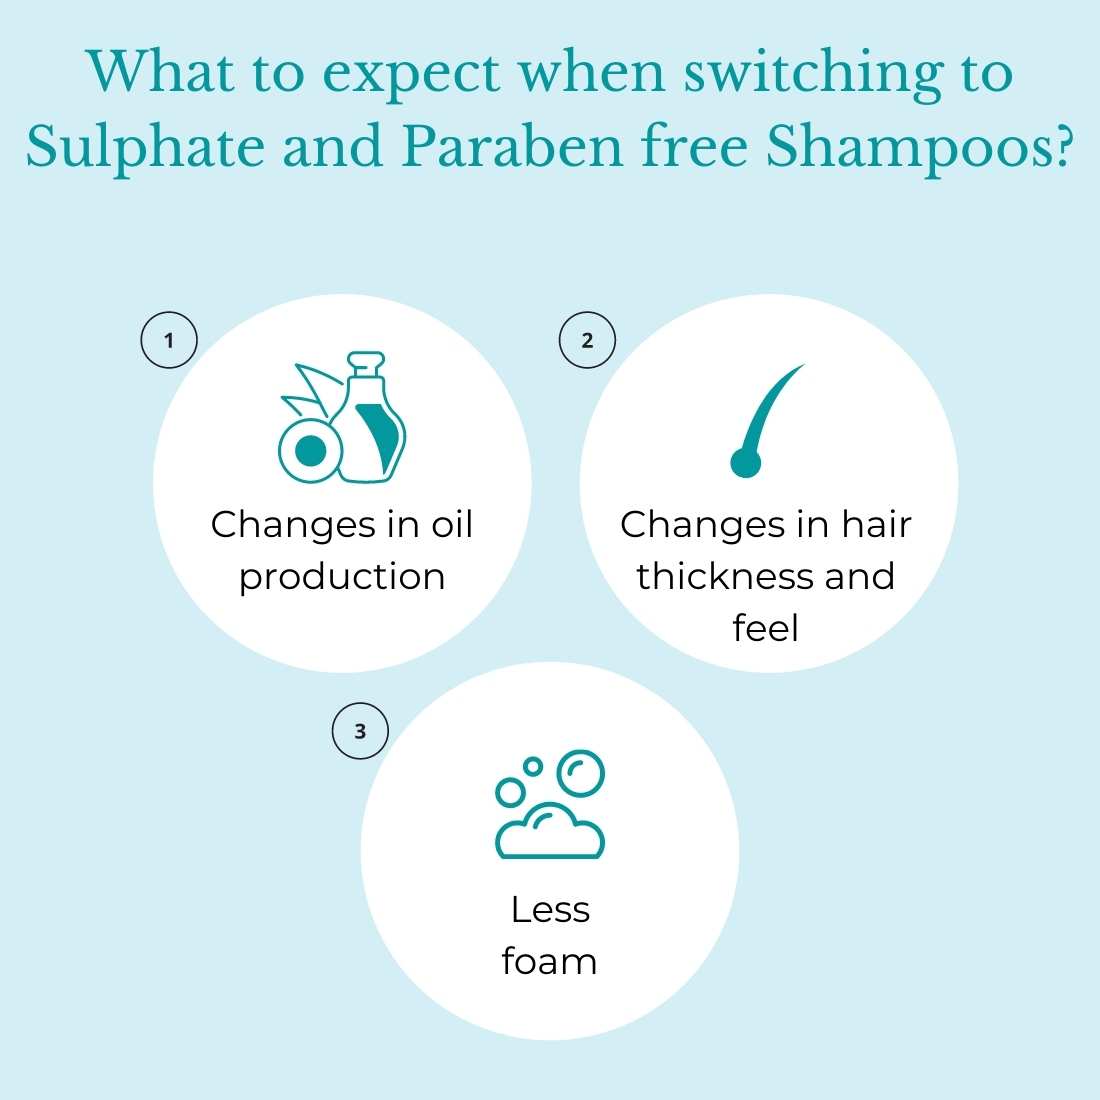 This image shows what to expect when switching from regular shampoo to paraben free and sulphate free shampoo.